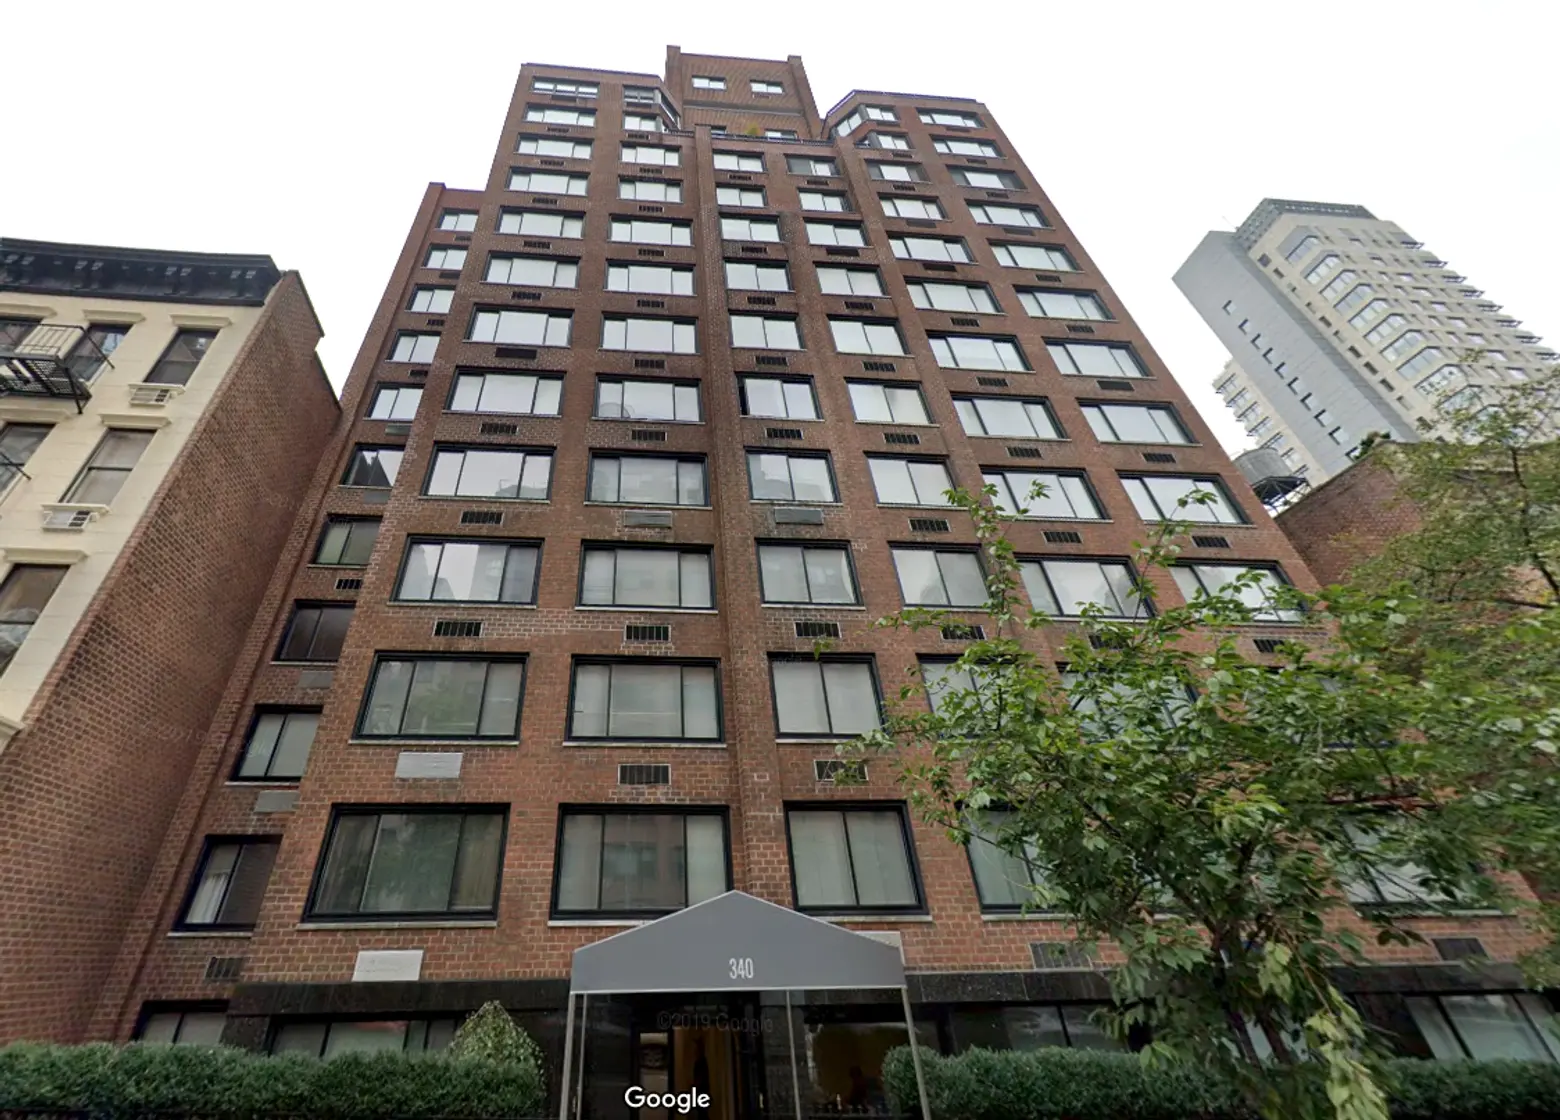 A-Rod takes another swing at NYC real estate, buys second apartment building